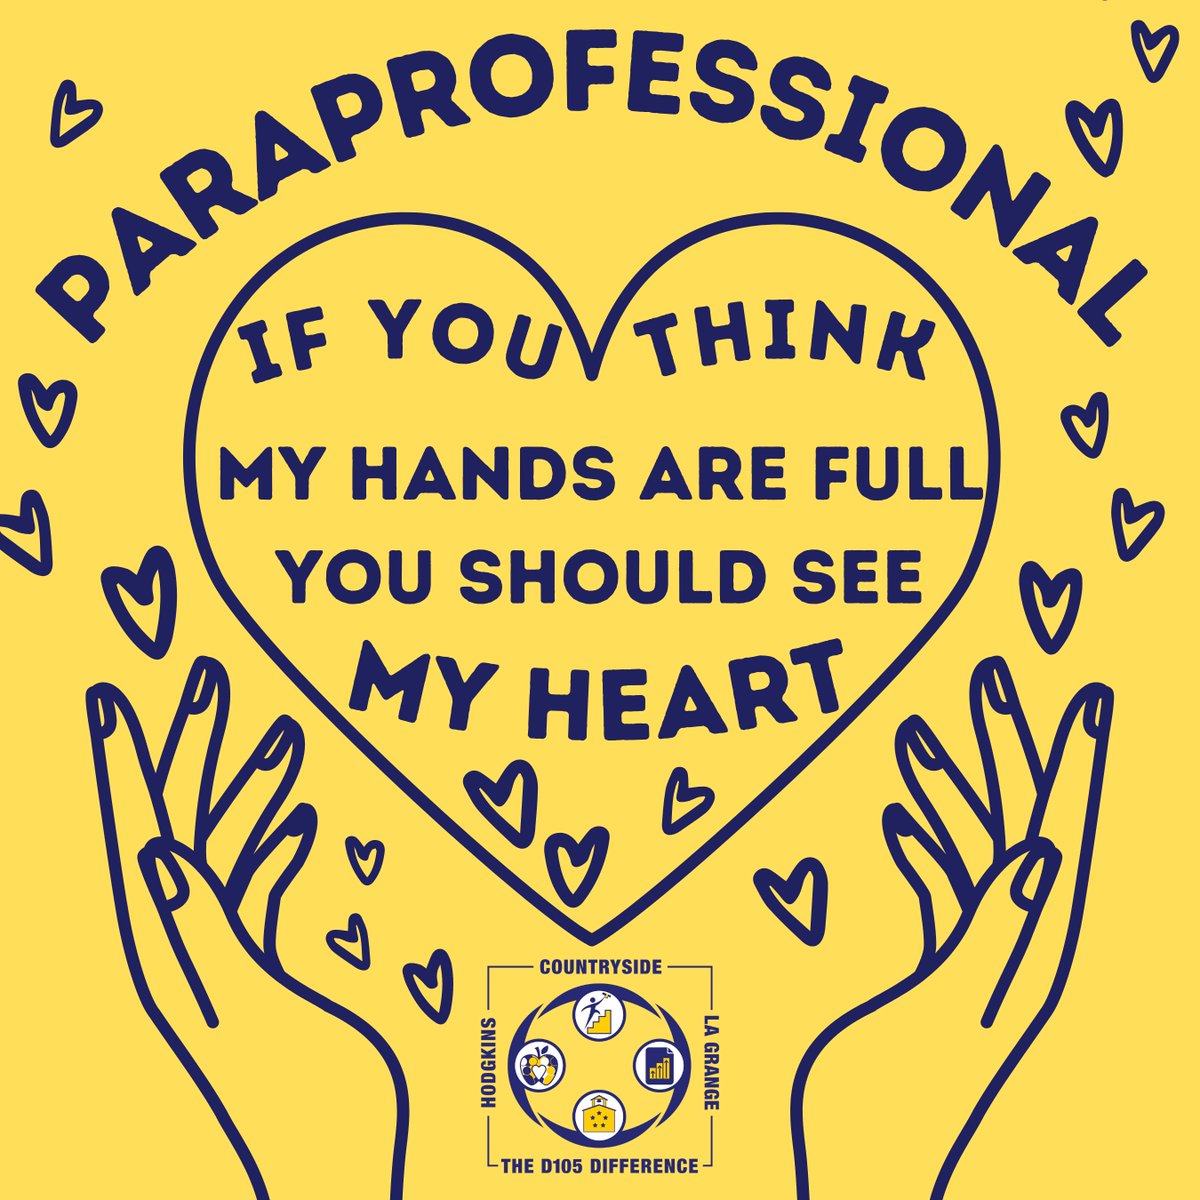 We have an incredible group of Paraprofessionals here in D105! We would like to take a moment on this Paraprofessional Appreciation Day to thank each of you for going above and beyond every single day to support our students and staff. WE LOVE YOU, D105 PARAS!! 💛💙